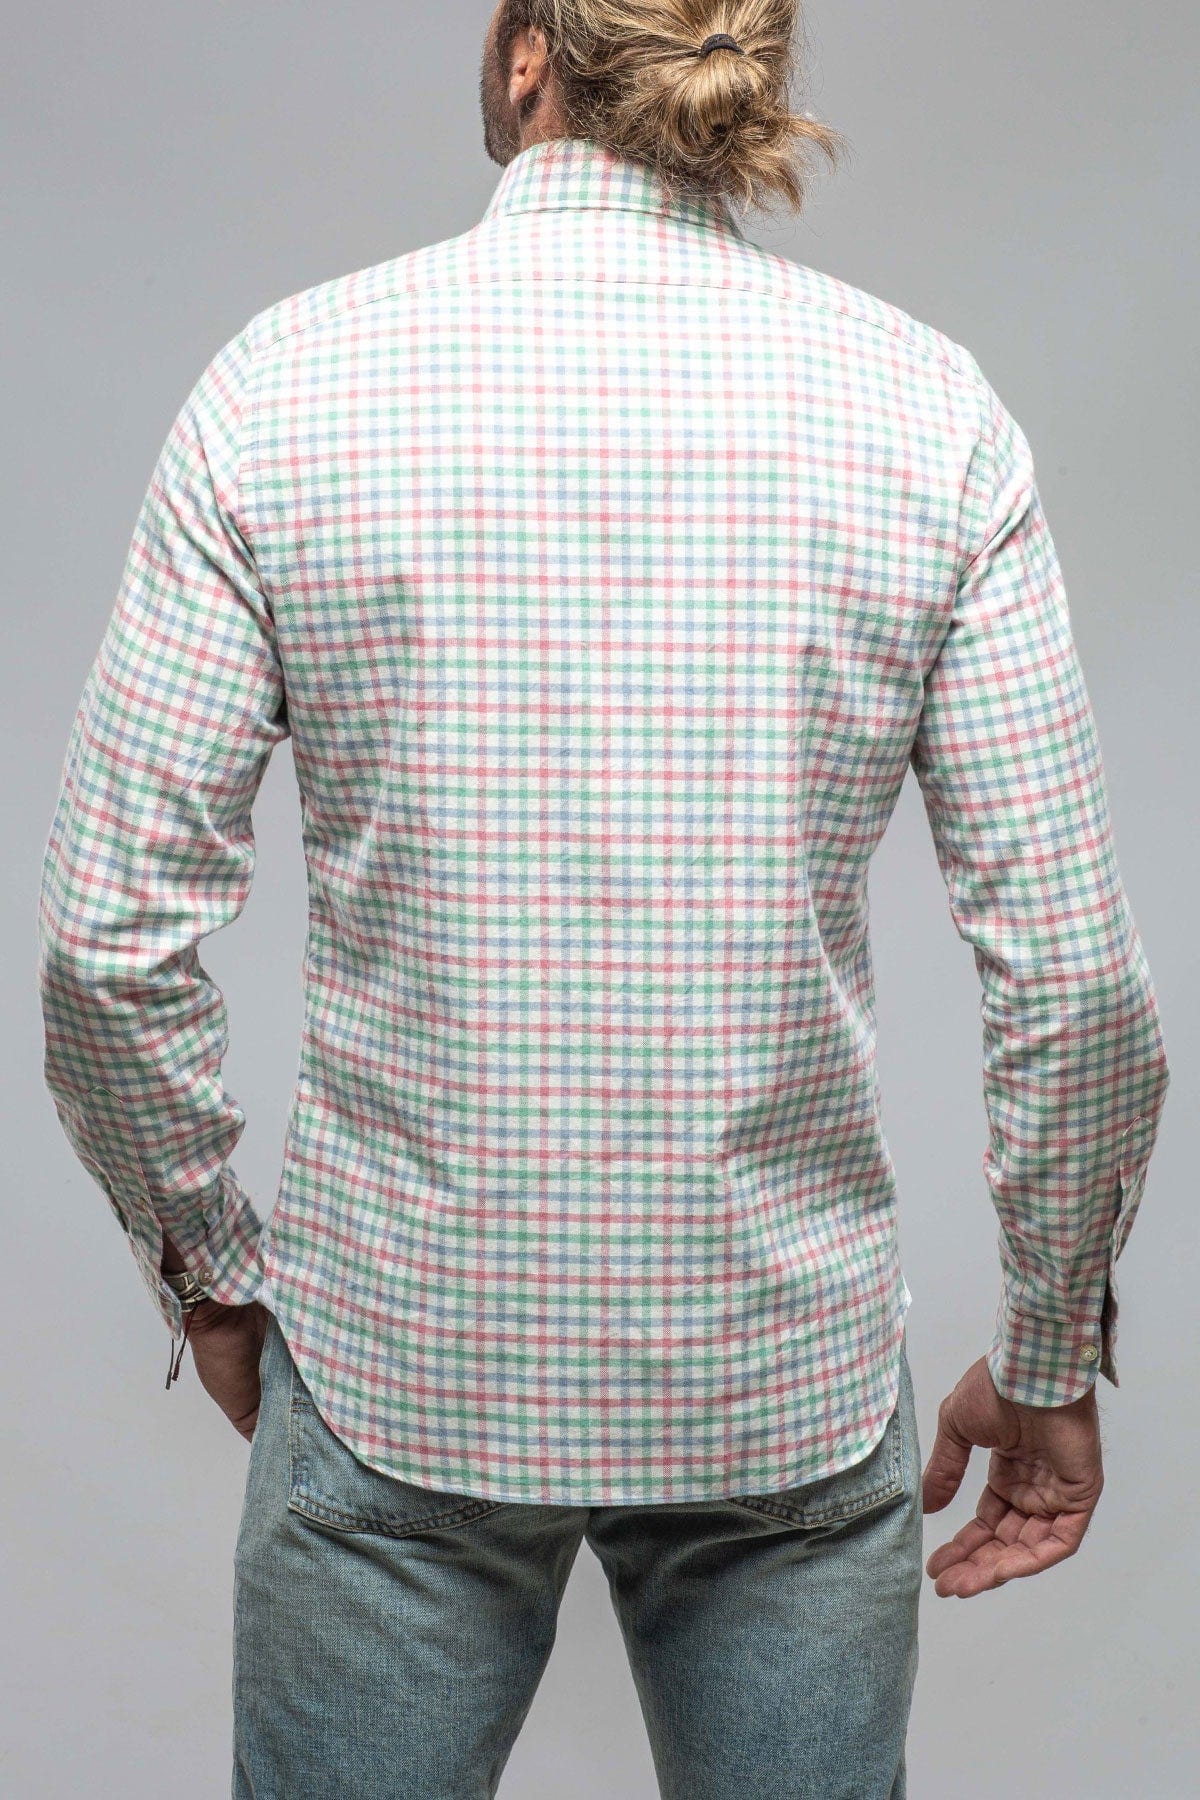 Crater Shirt In Green/Pink Check - AXEL'S